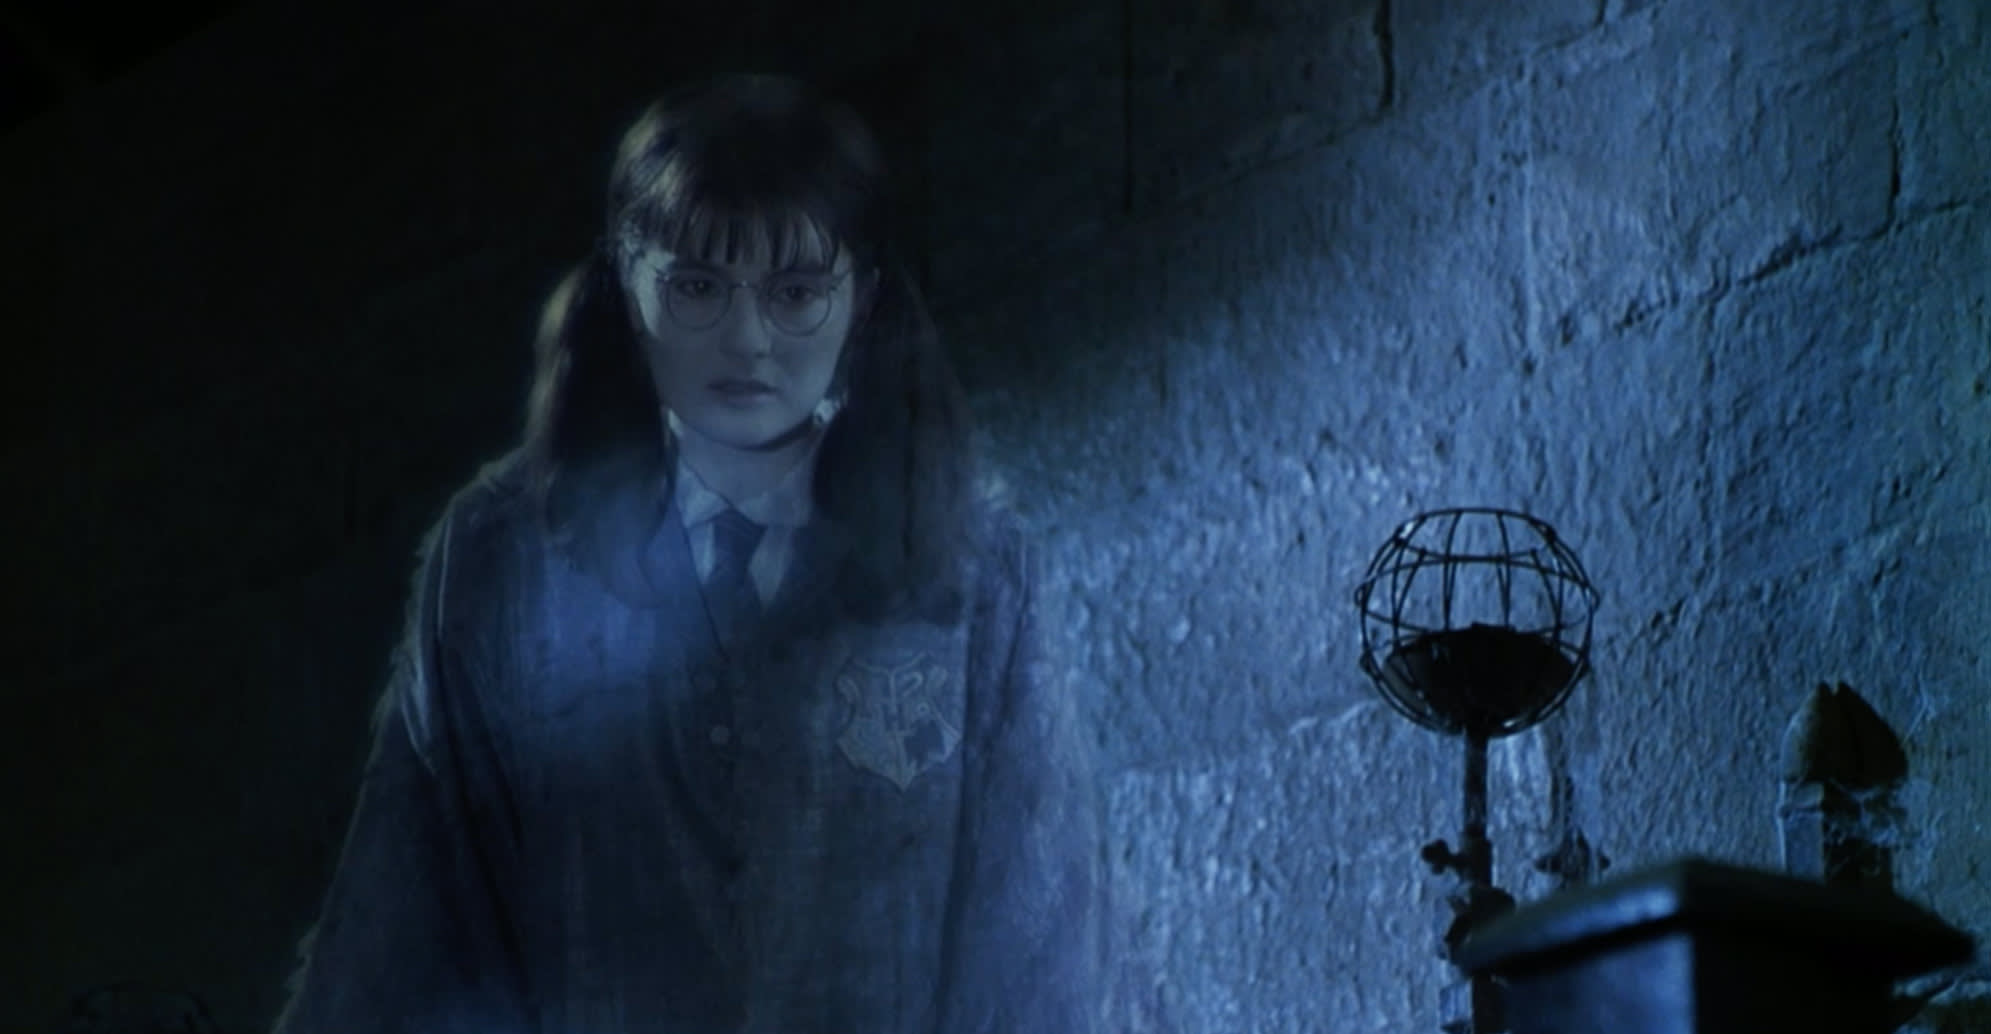 Moaning Myrtle: The Ghostly Presence in the Girls' Bathroom